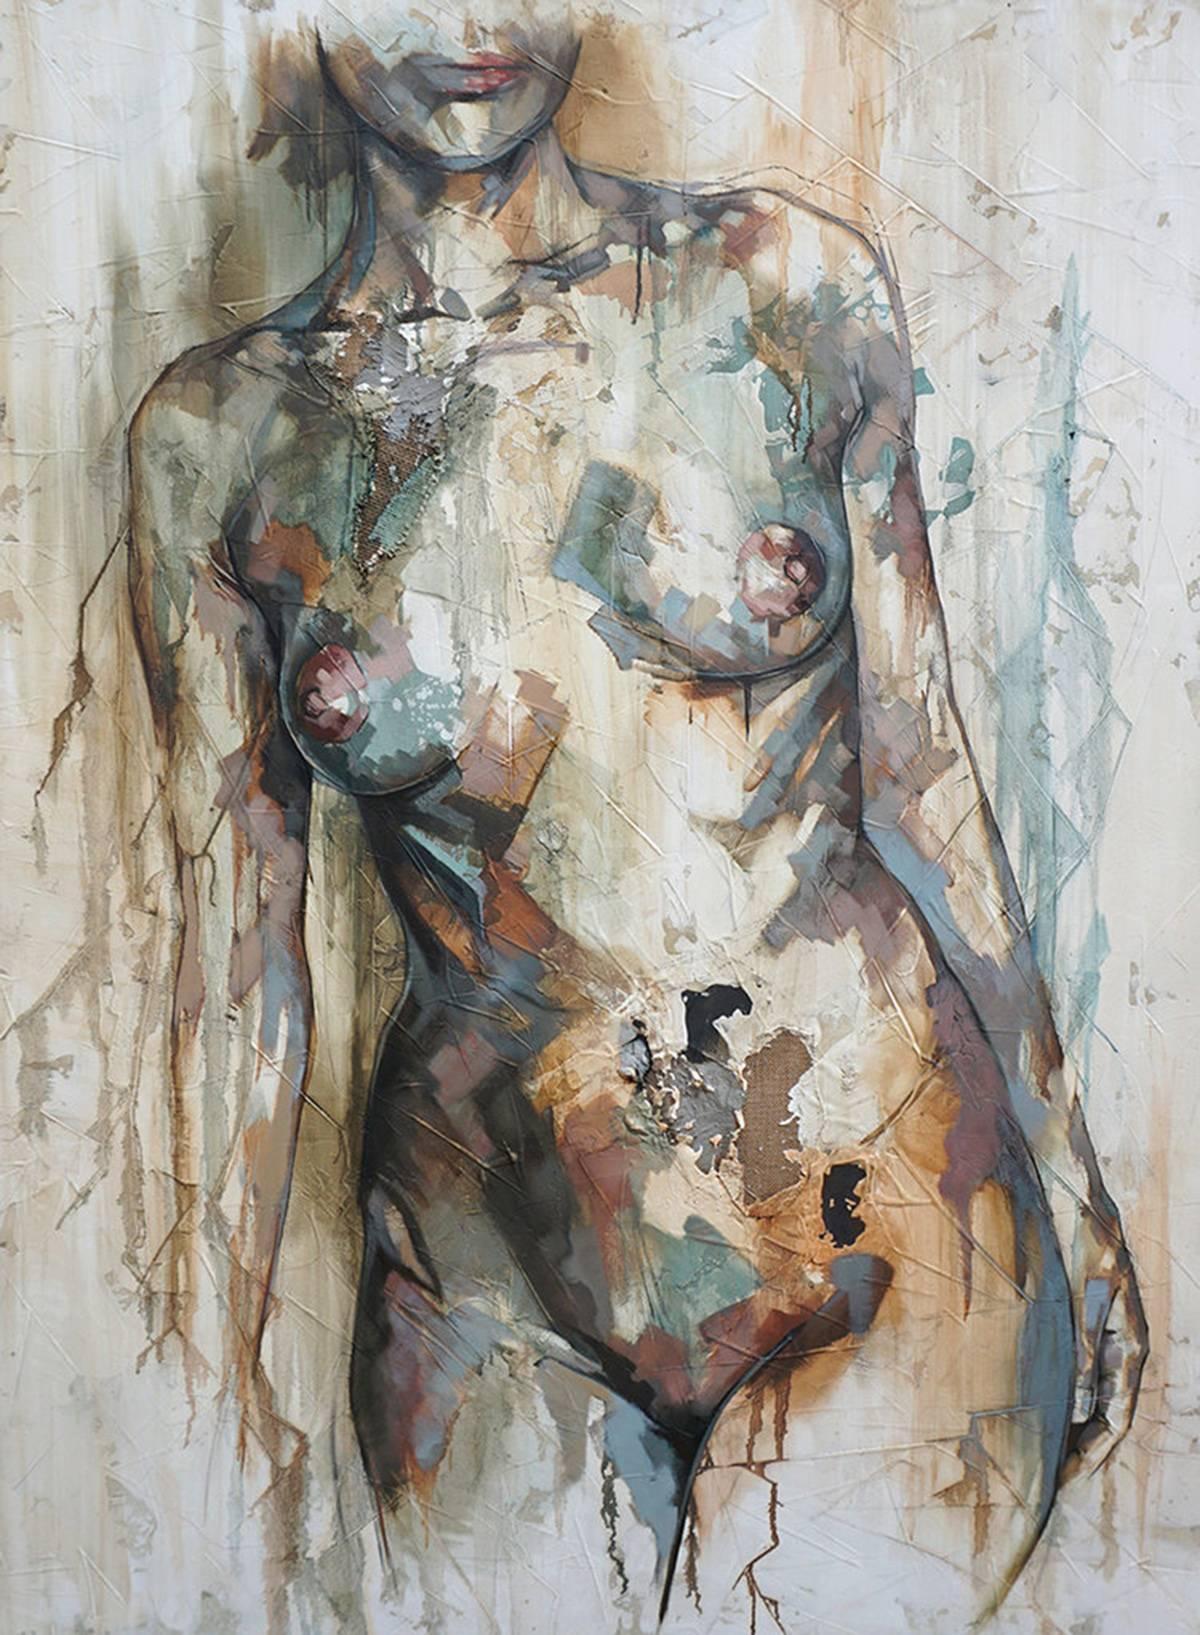 Fragile by F. Jimenez - Contemporary, Abstract Female Nude Figurative Painting